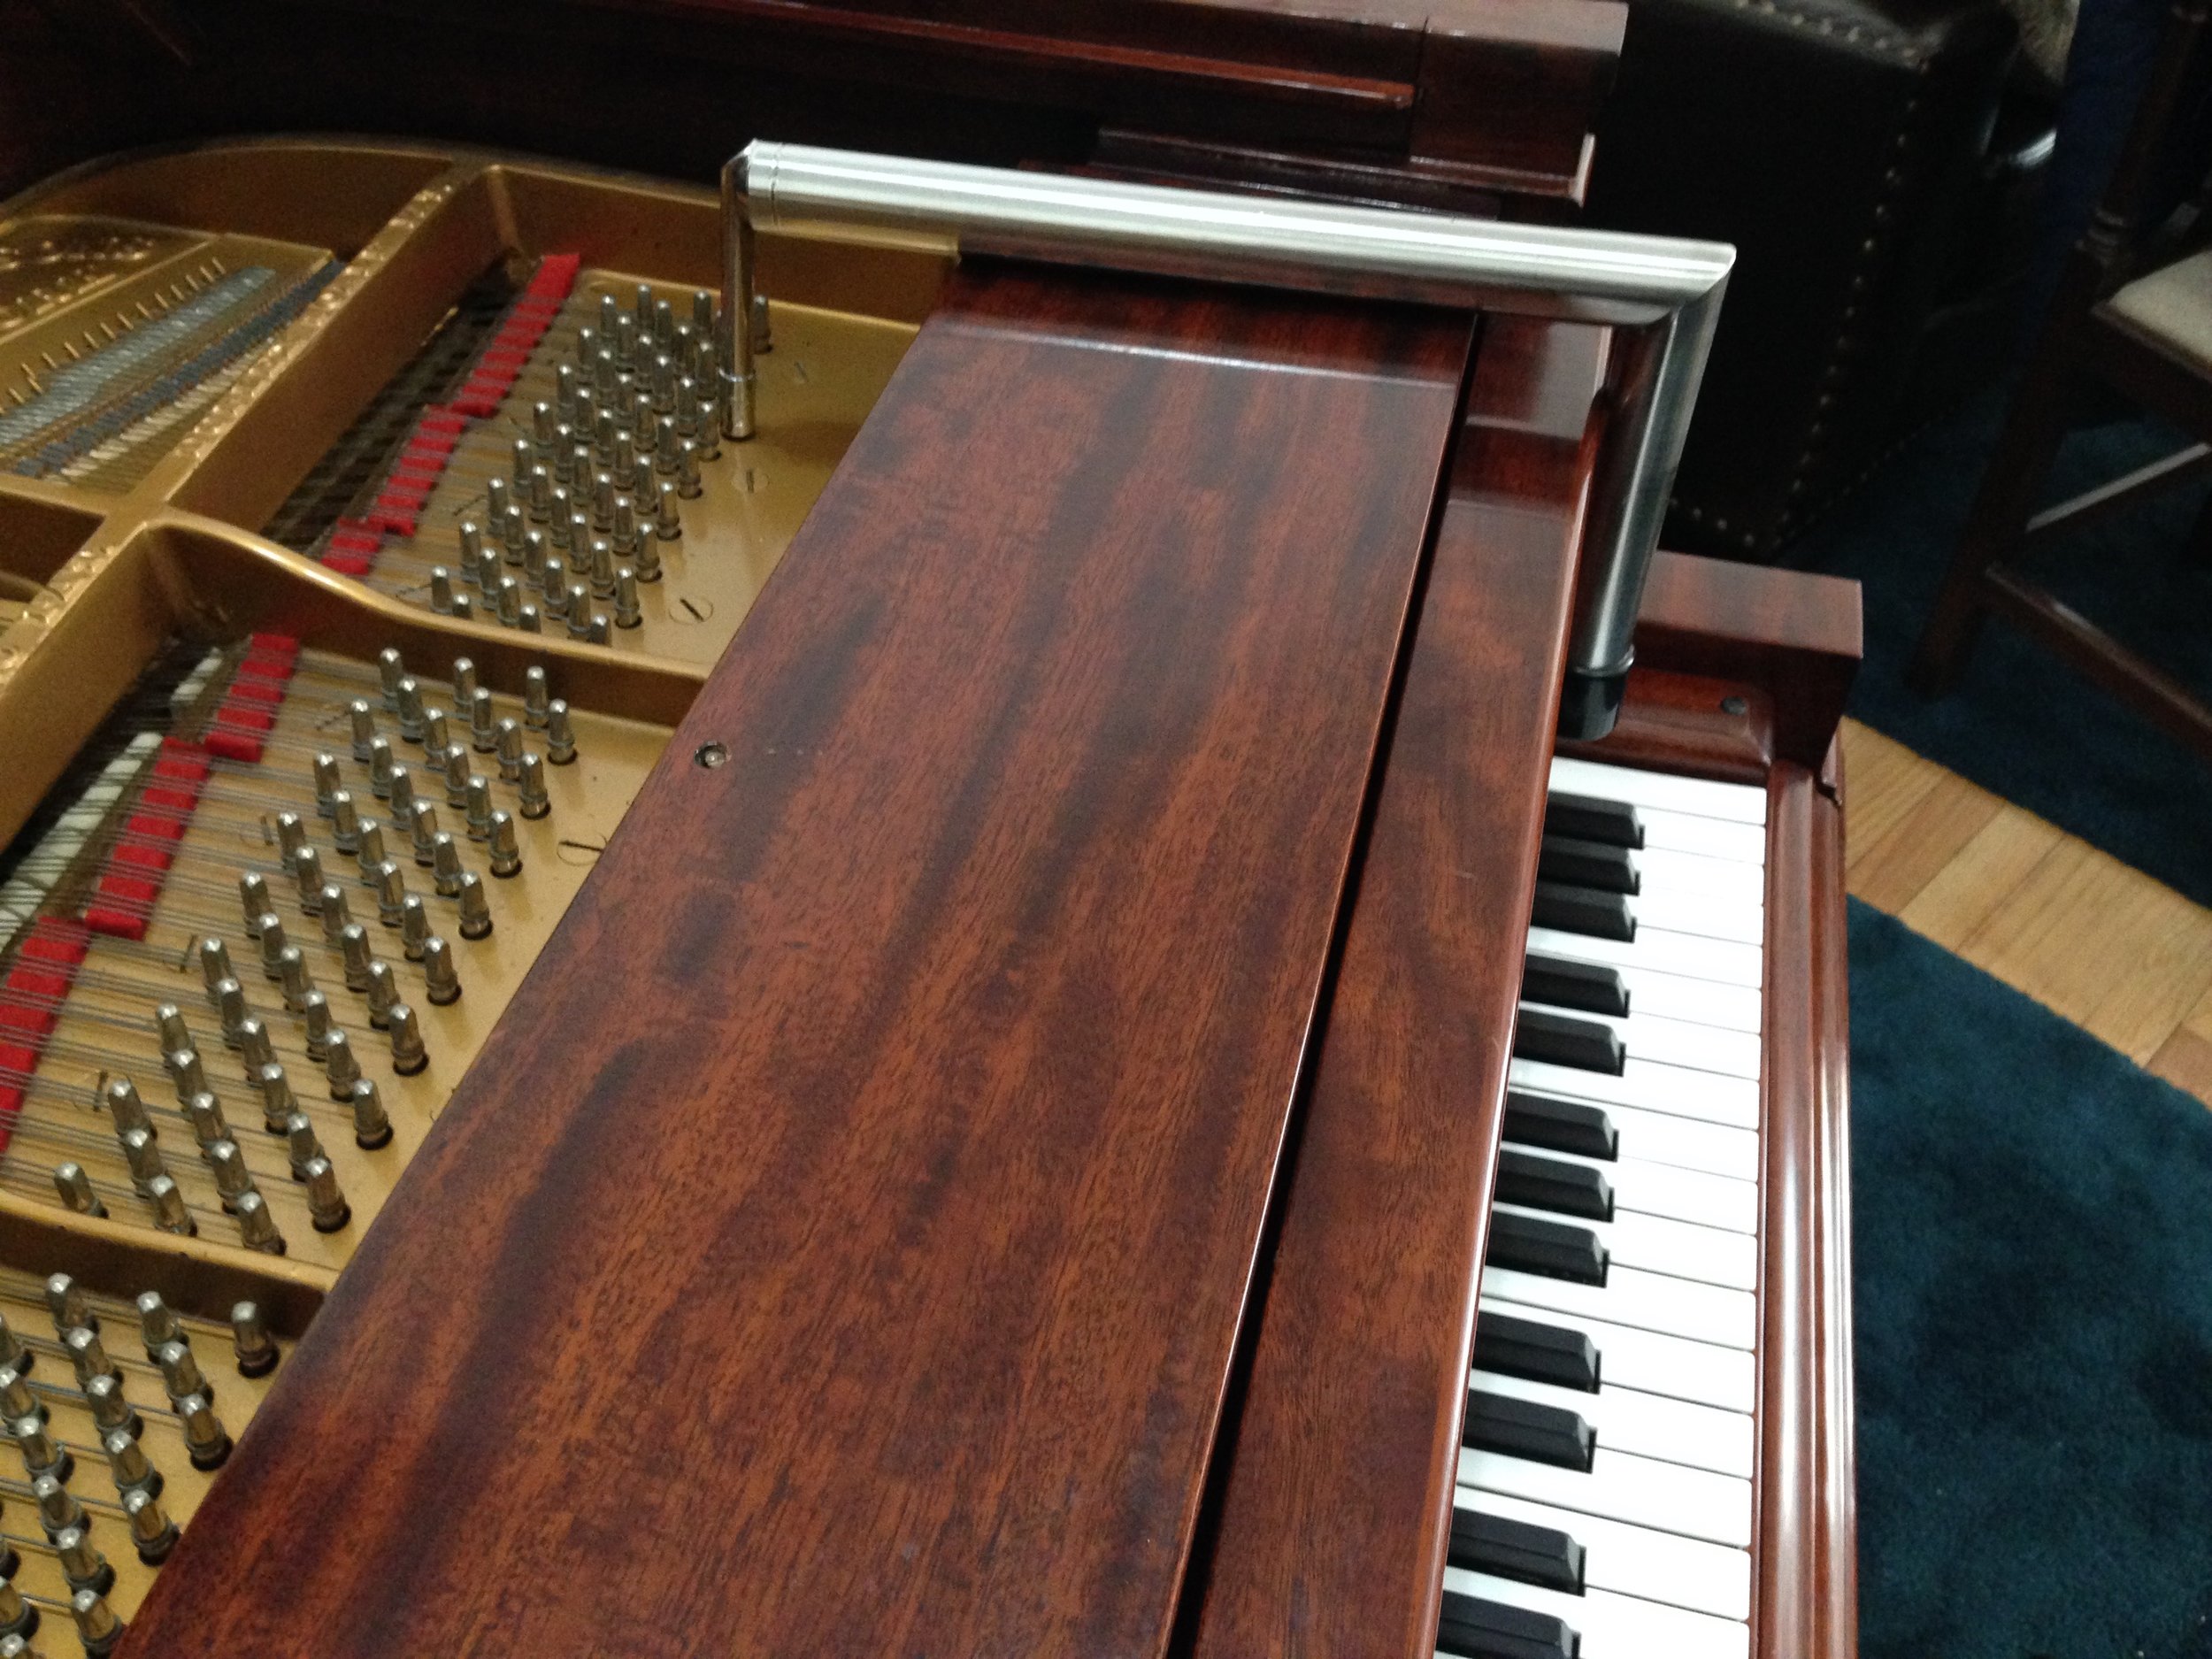 You'll also need an L-lever for pianos like the Steinway/Aeolian O.